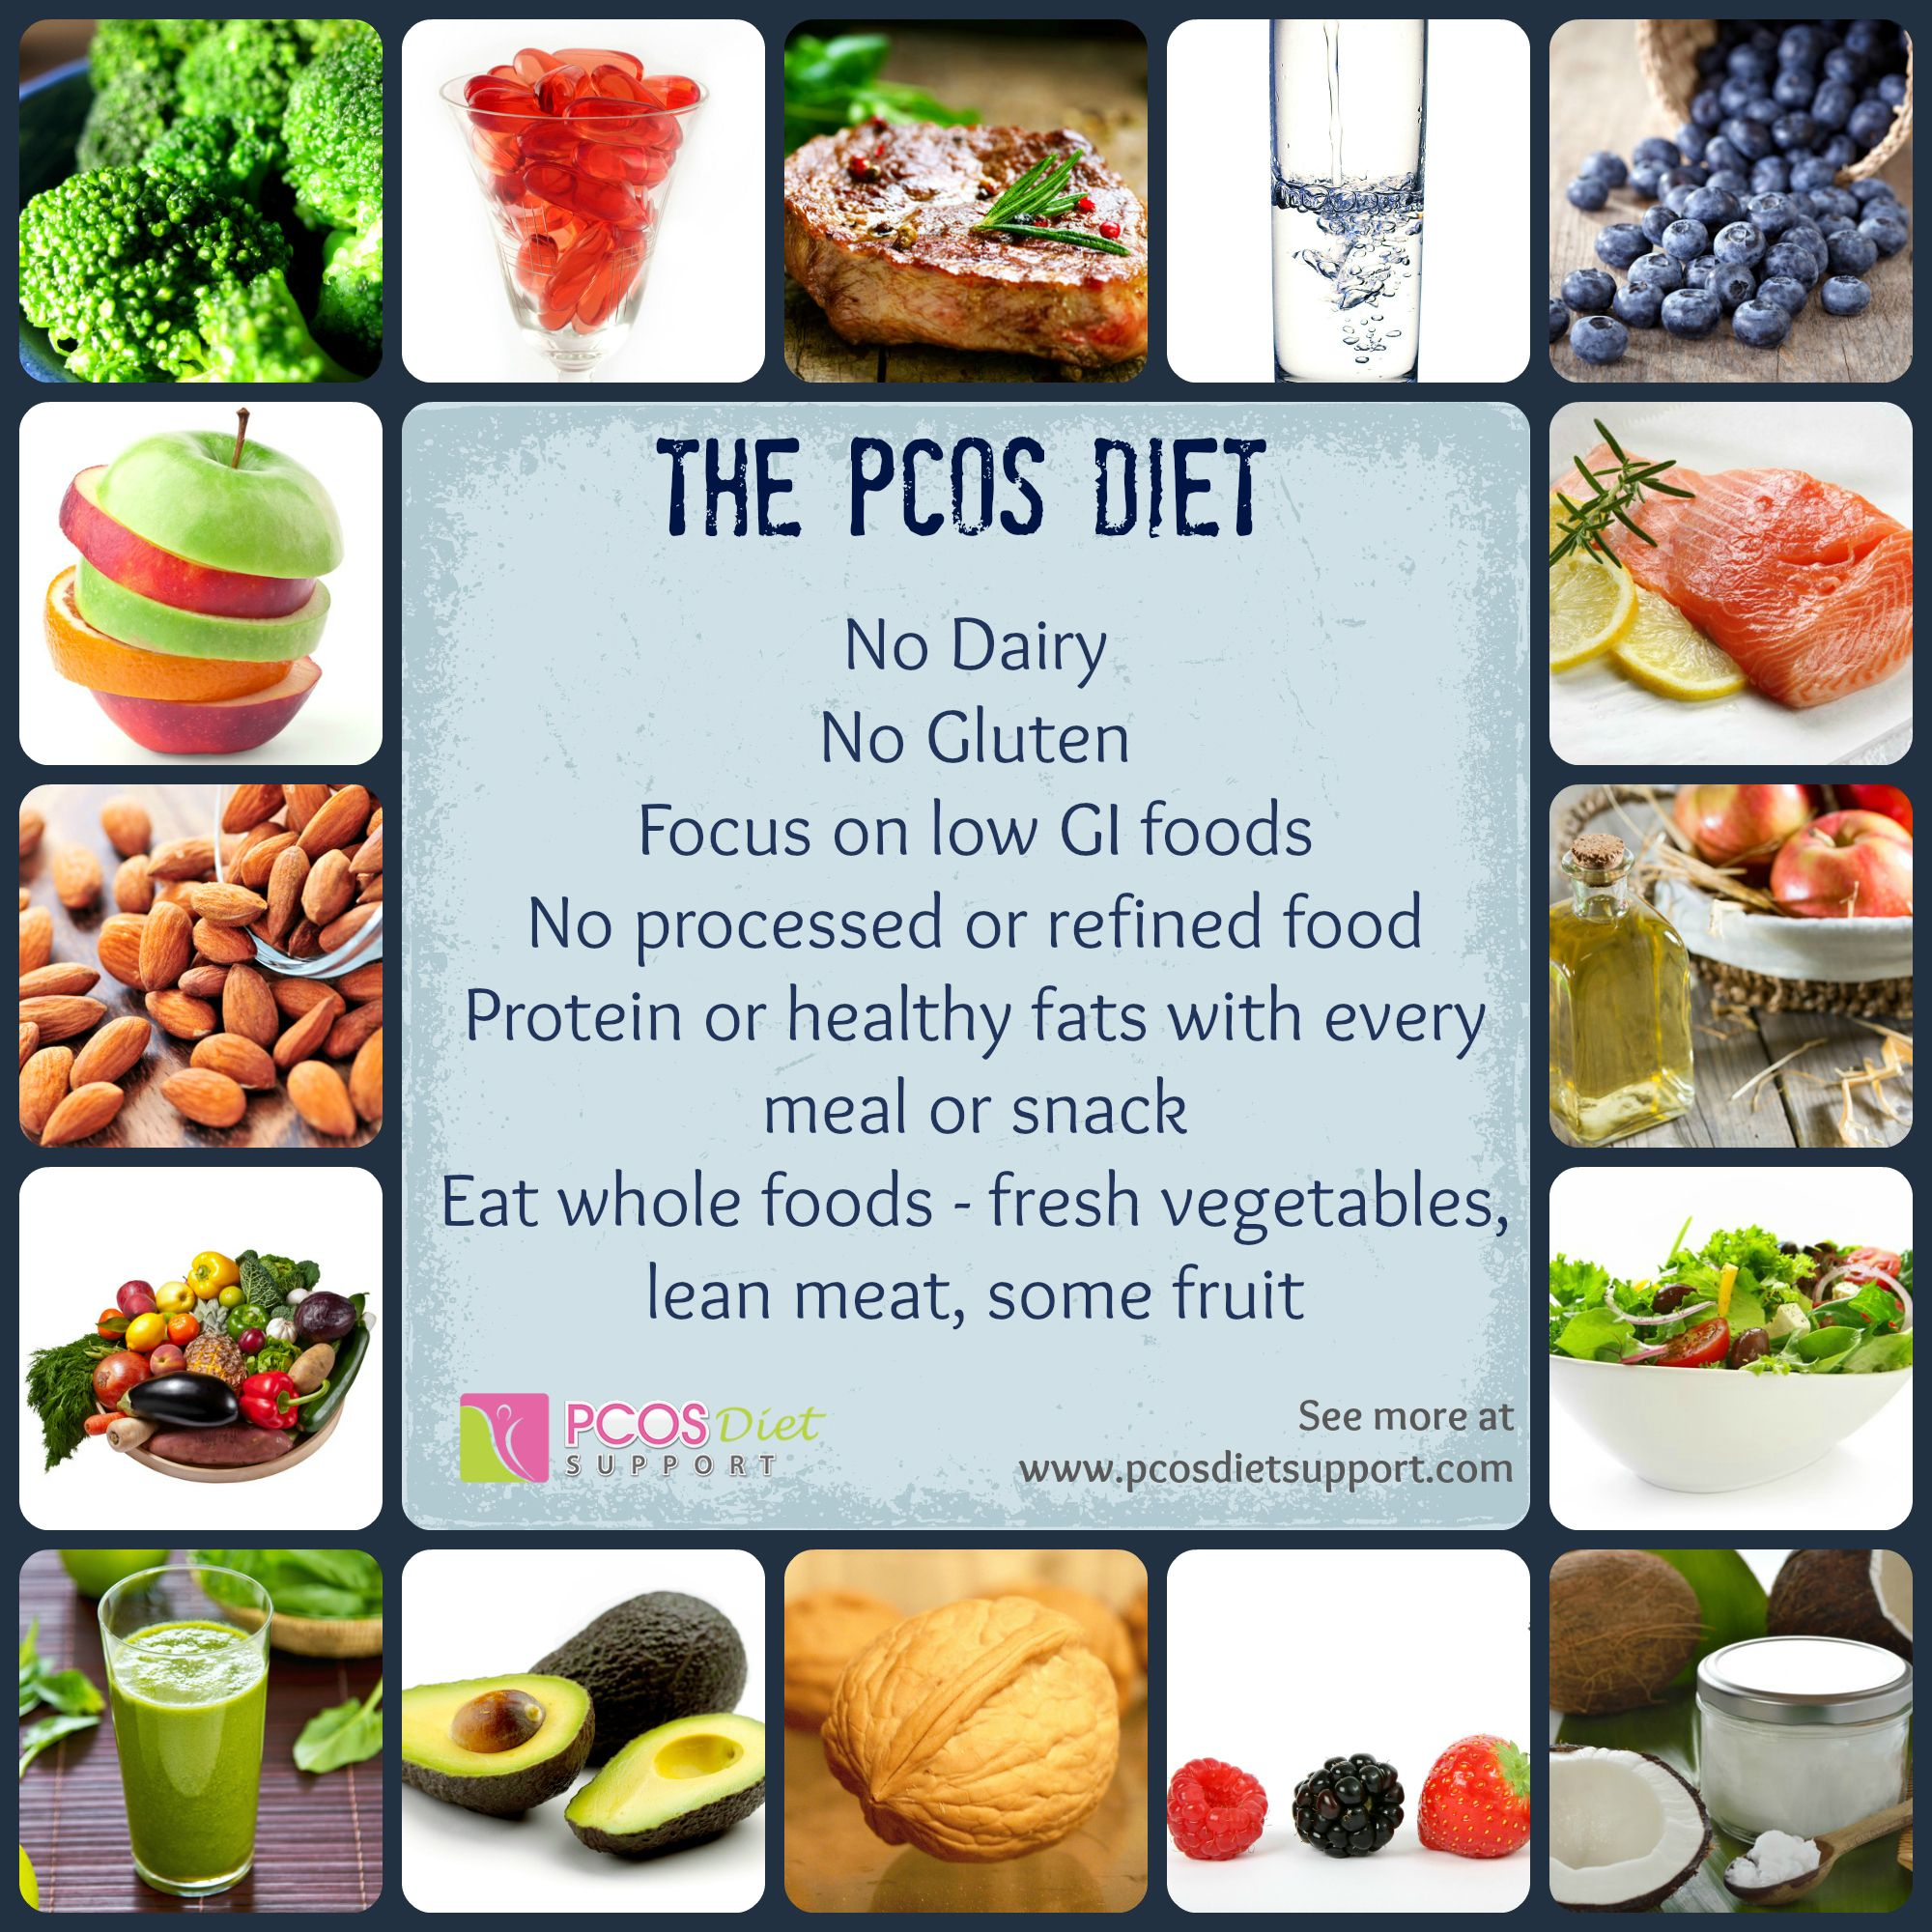 The PCOS Diet Simplified Pcos Recipes Pcos Diet Support Pcos Diet Plan